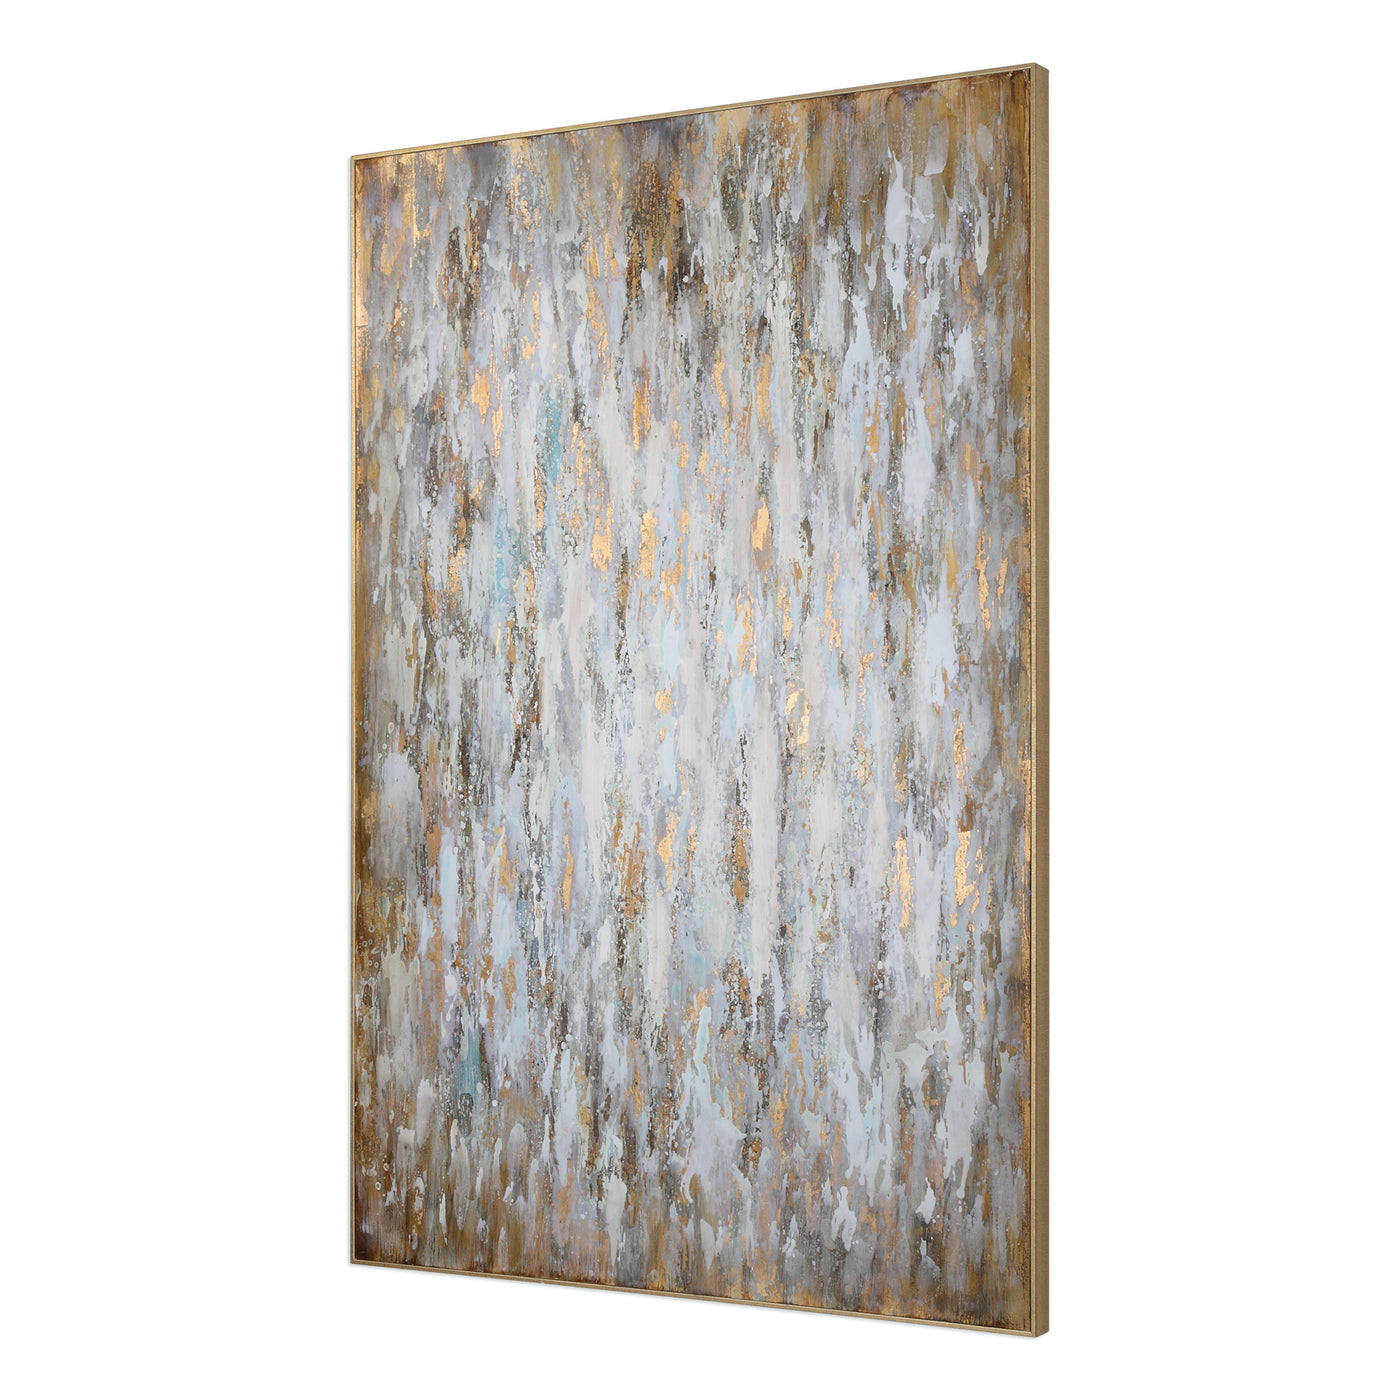 Sophisticated In Style, This Hand Painted Abstract On Canvas Completes Any Contemporary Or Modern Space. Shades Of White, ...